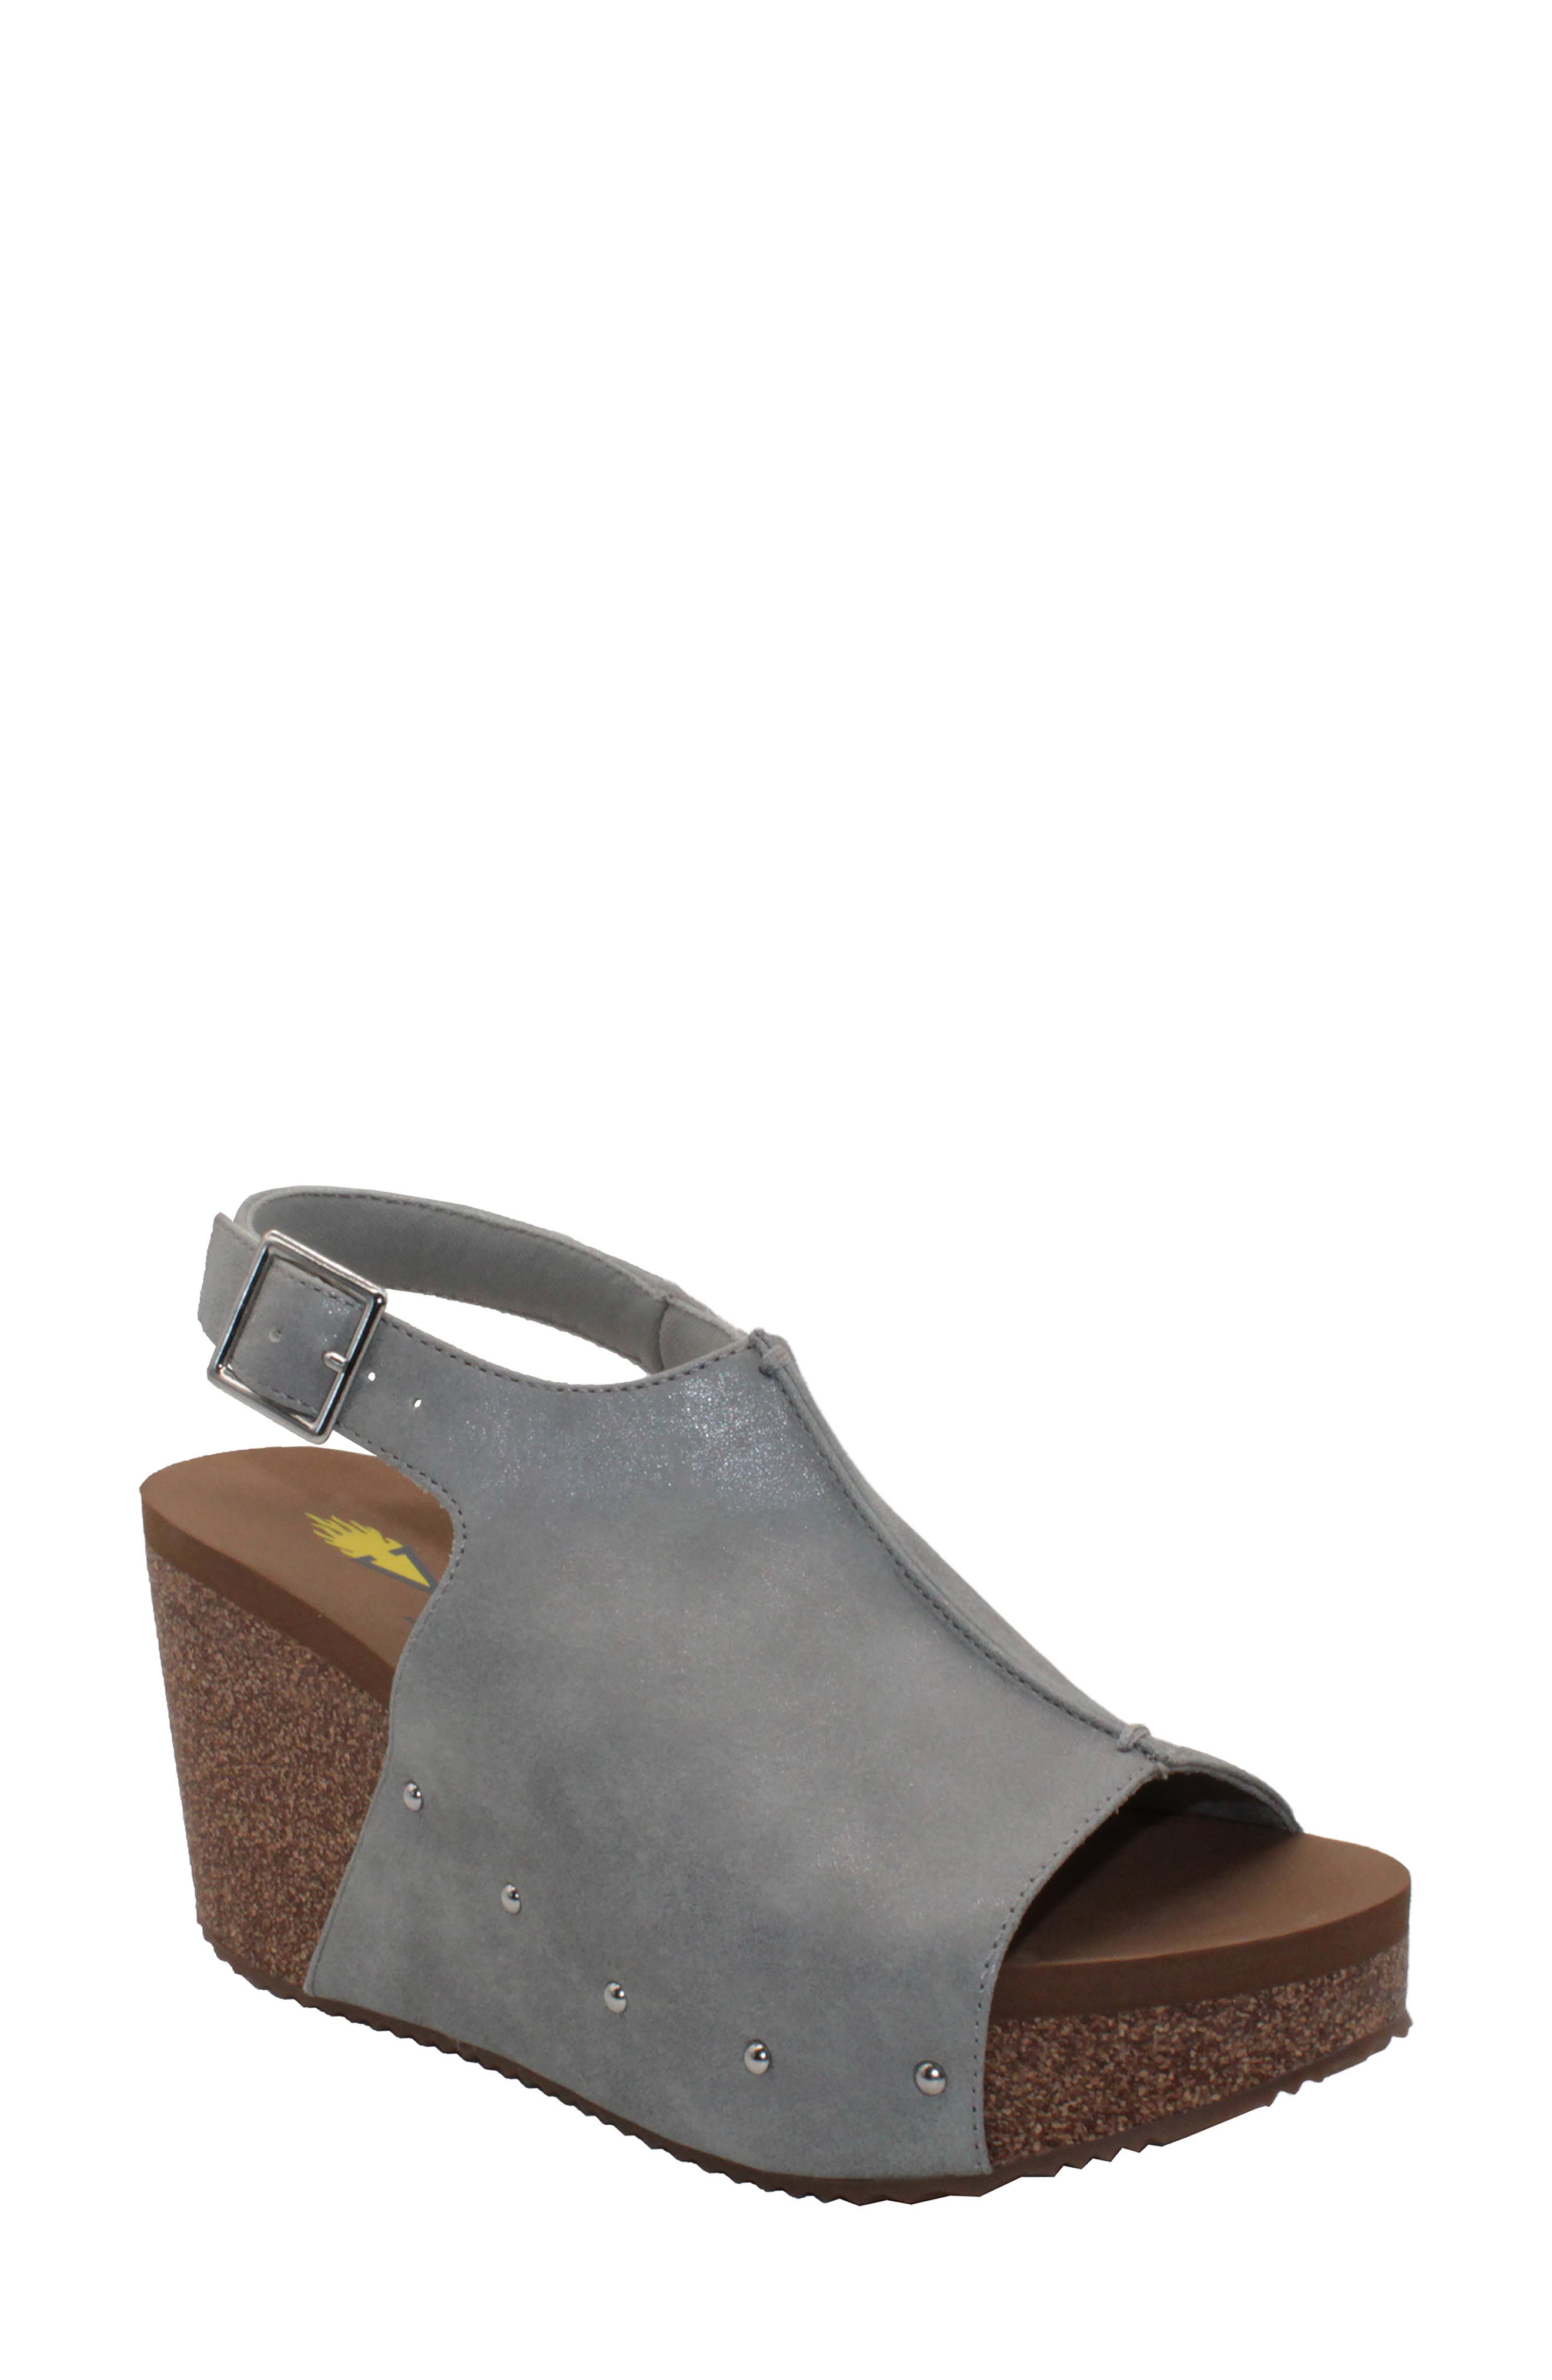 Triton Espadrille Wedge in Grey Fabric at Nordstrom Nordstrom Women Shoes High Heels Wedges Wedge Sandals 